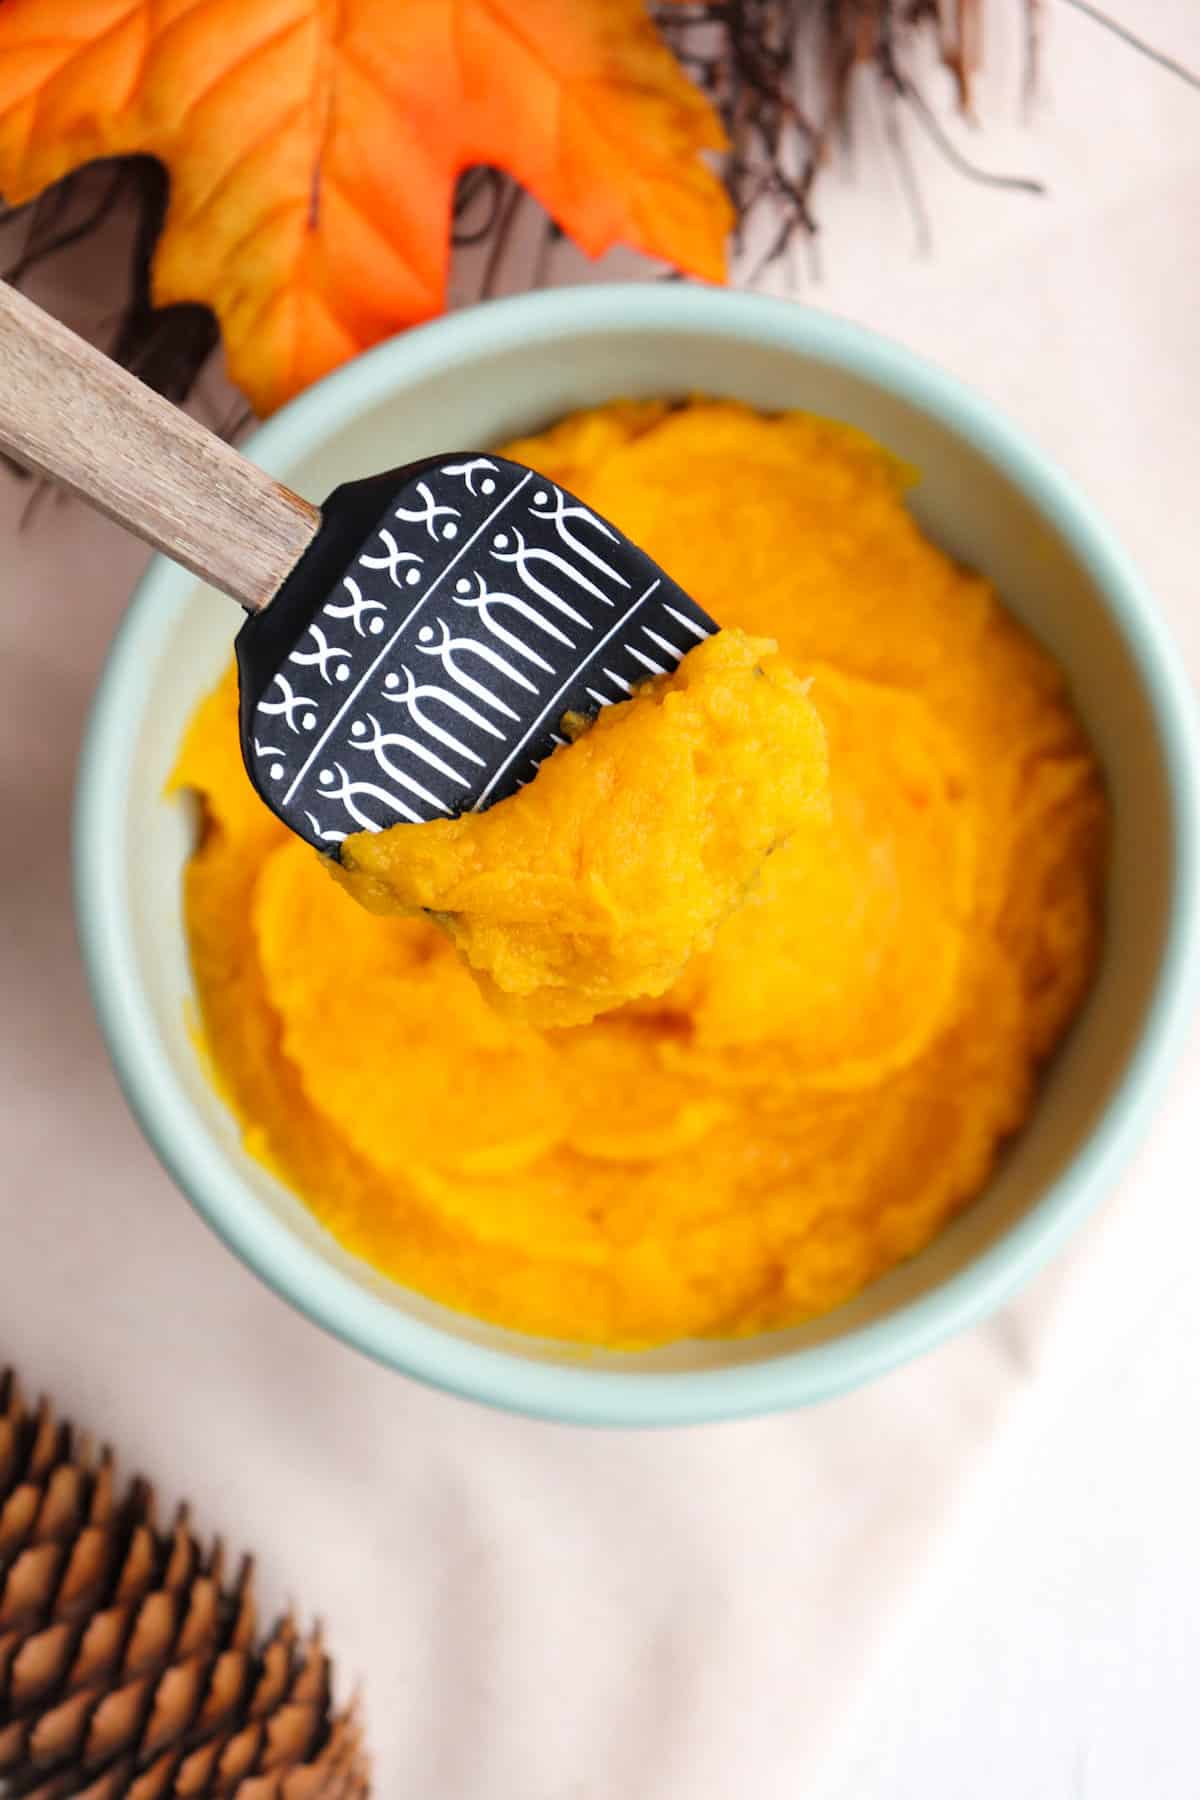 spatula scooped up pumpkin puree from bowl.